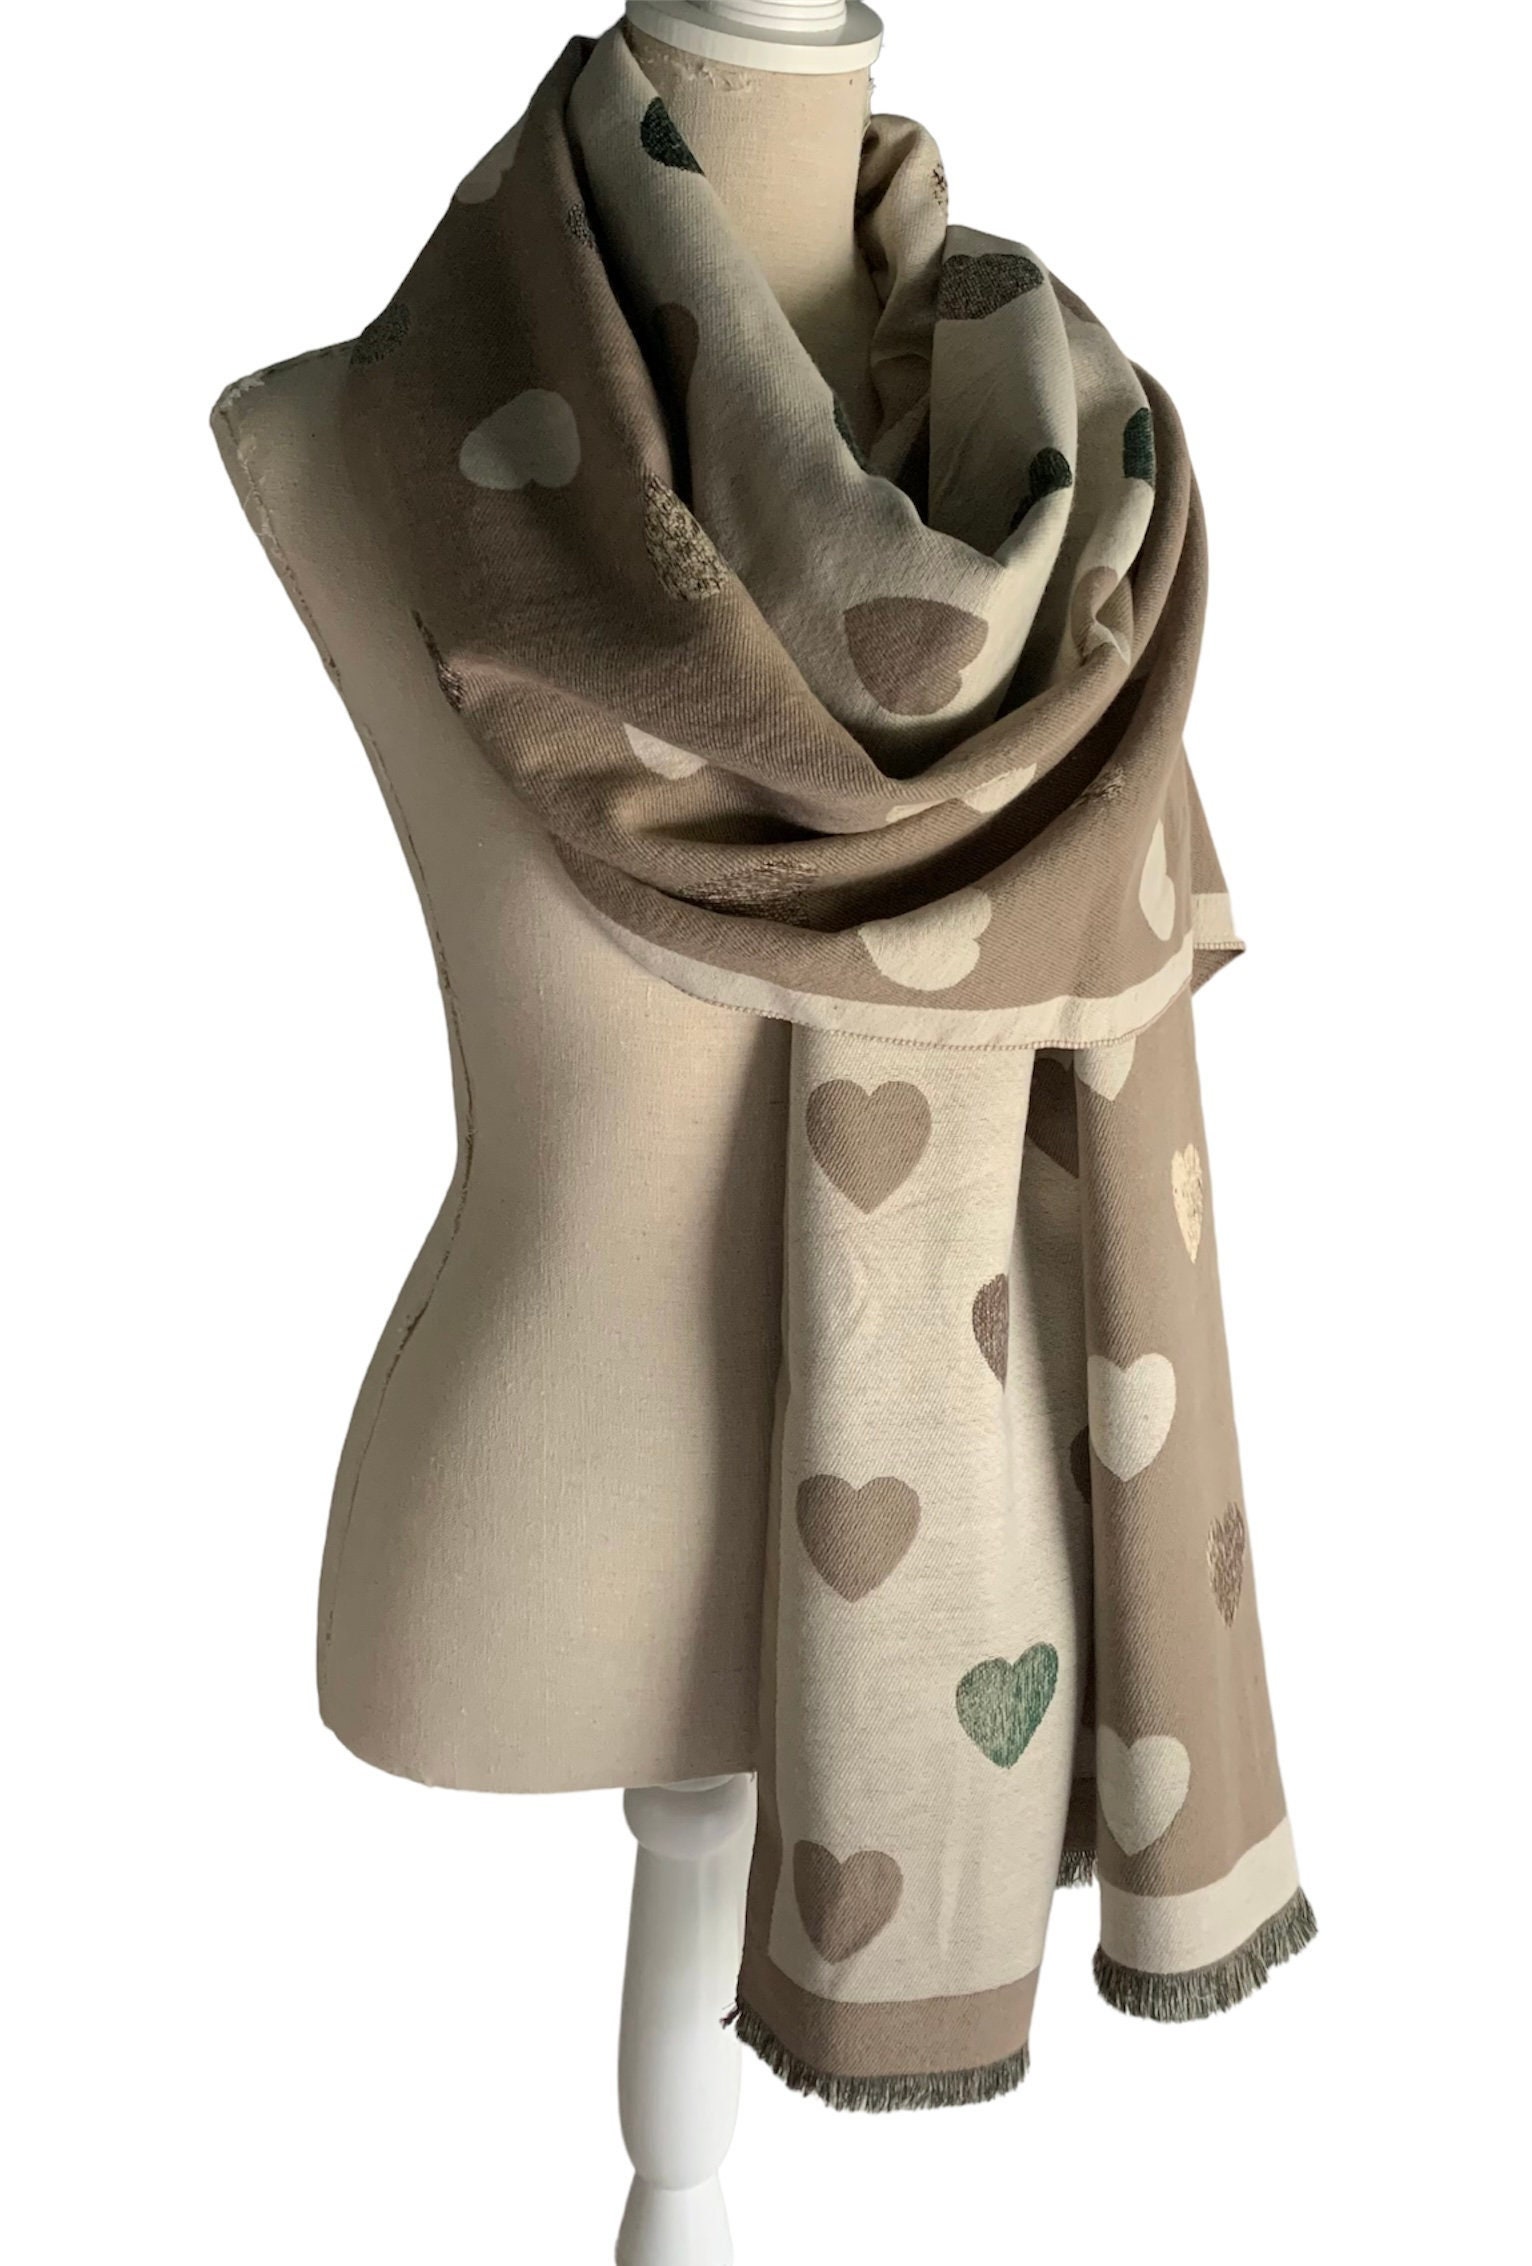 Burberry Heart Print Giant Check Reversible Cashmere Scarf